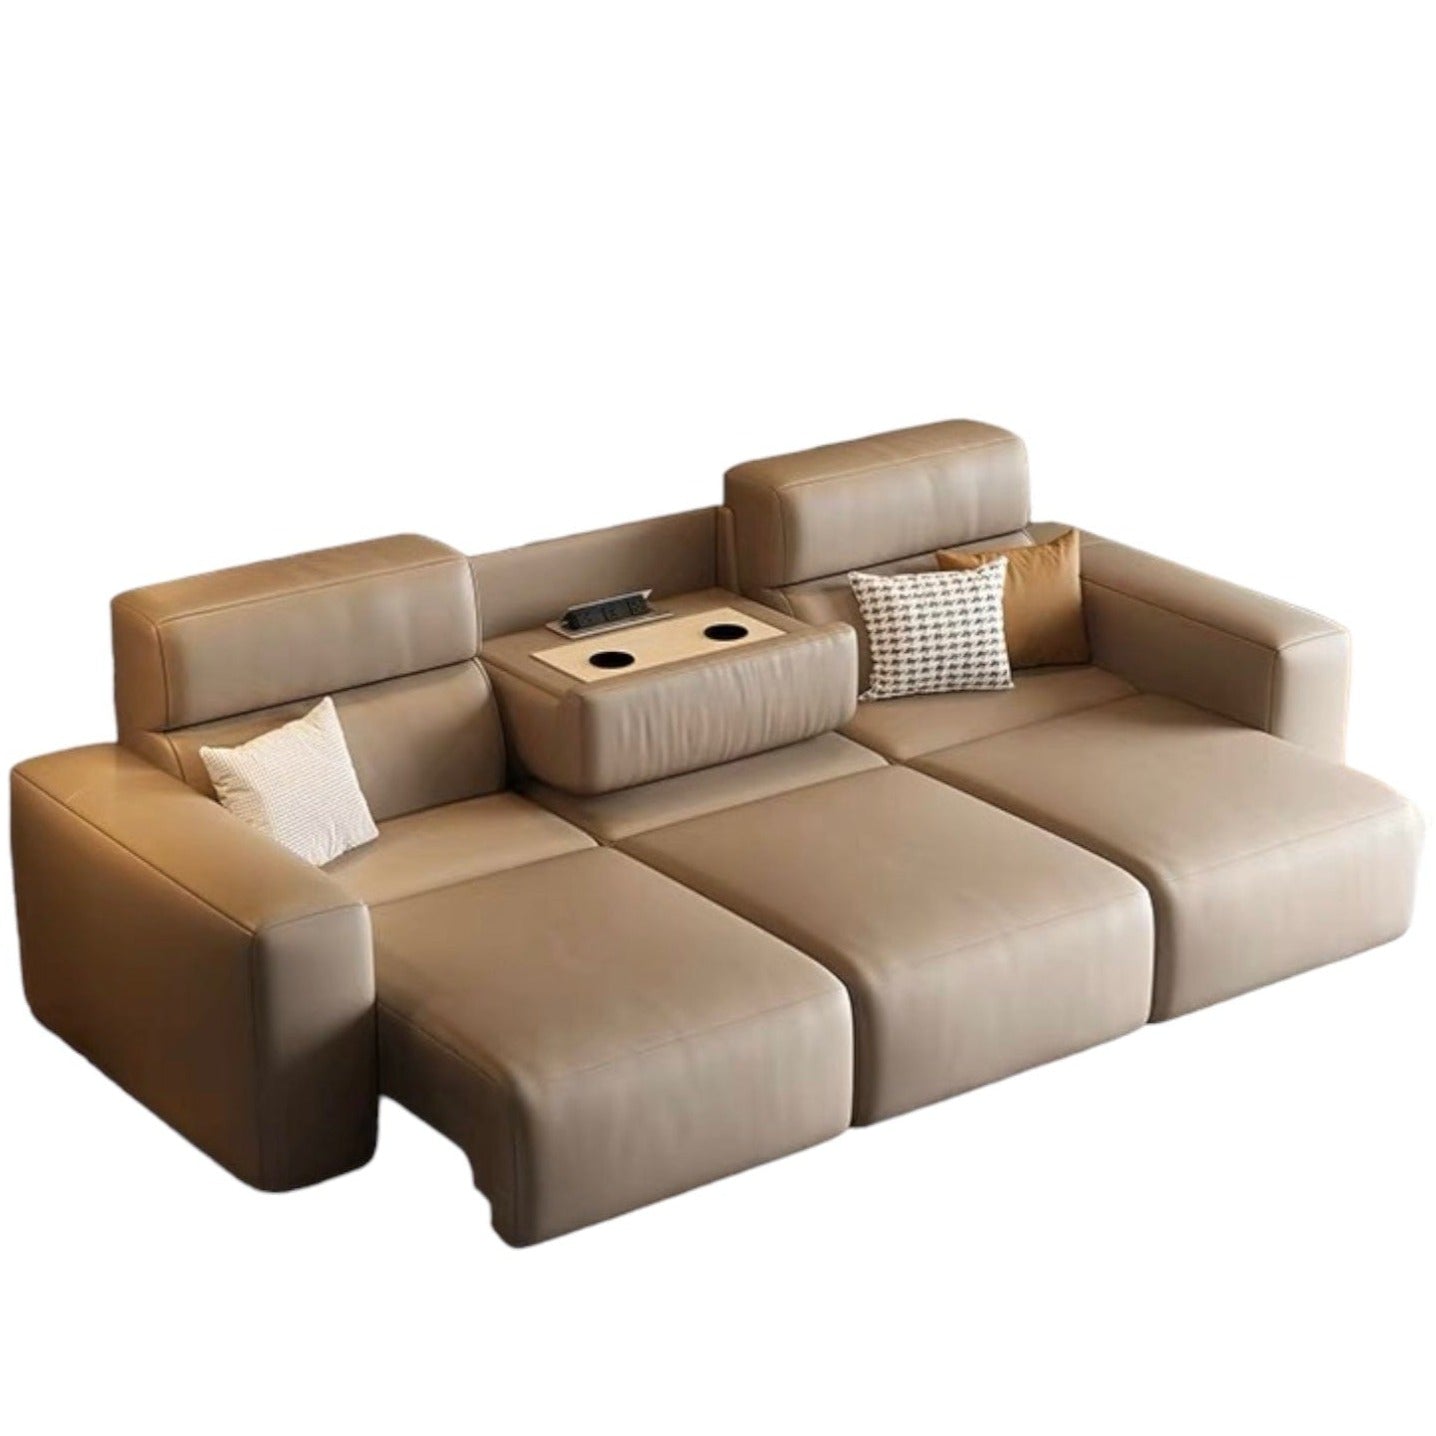 home-atelier-f31a Eron Electric Leather Sofa Bed